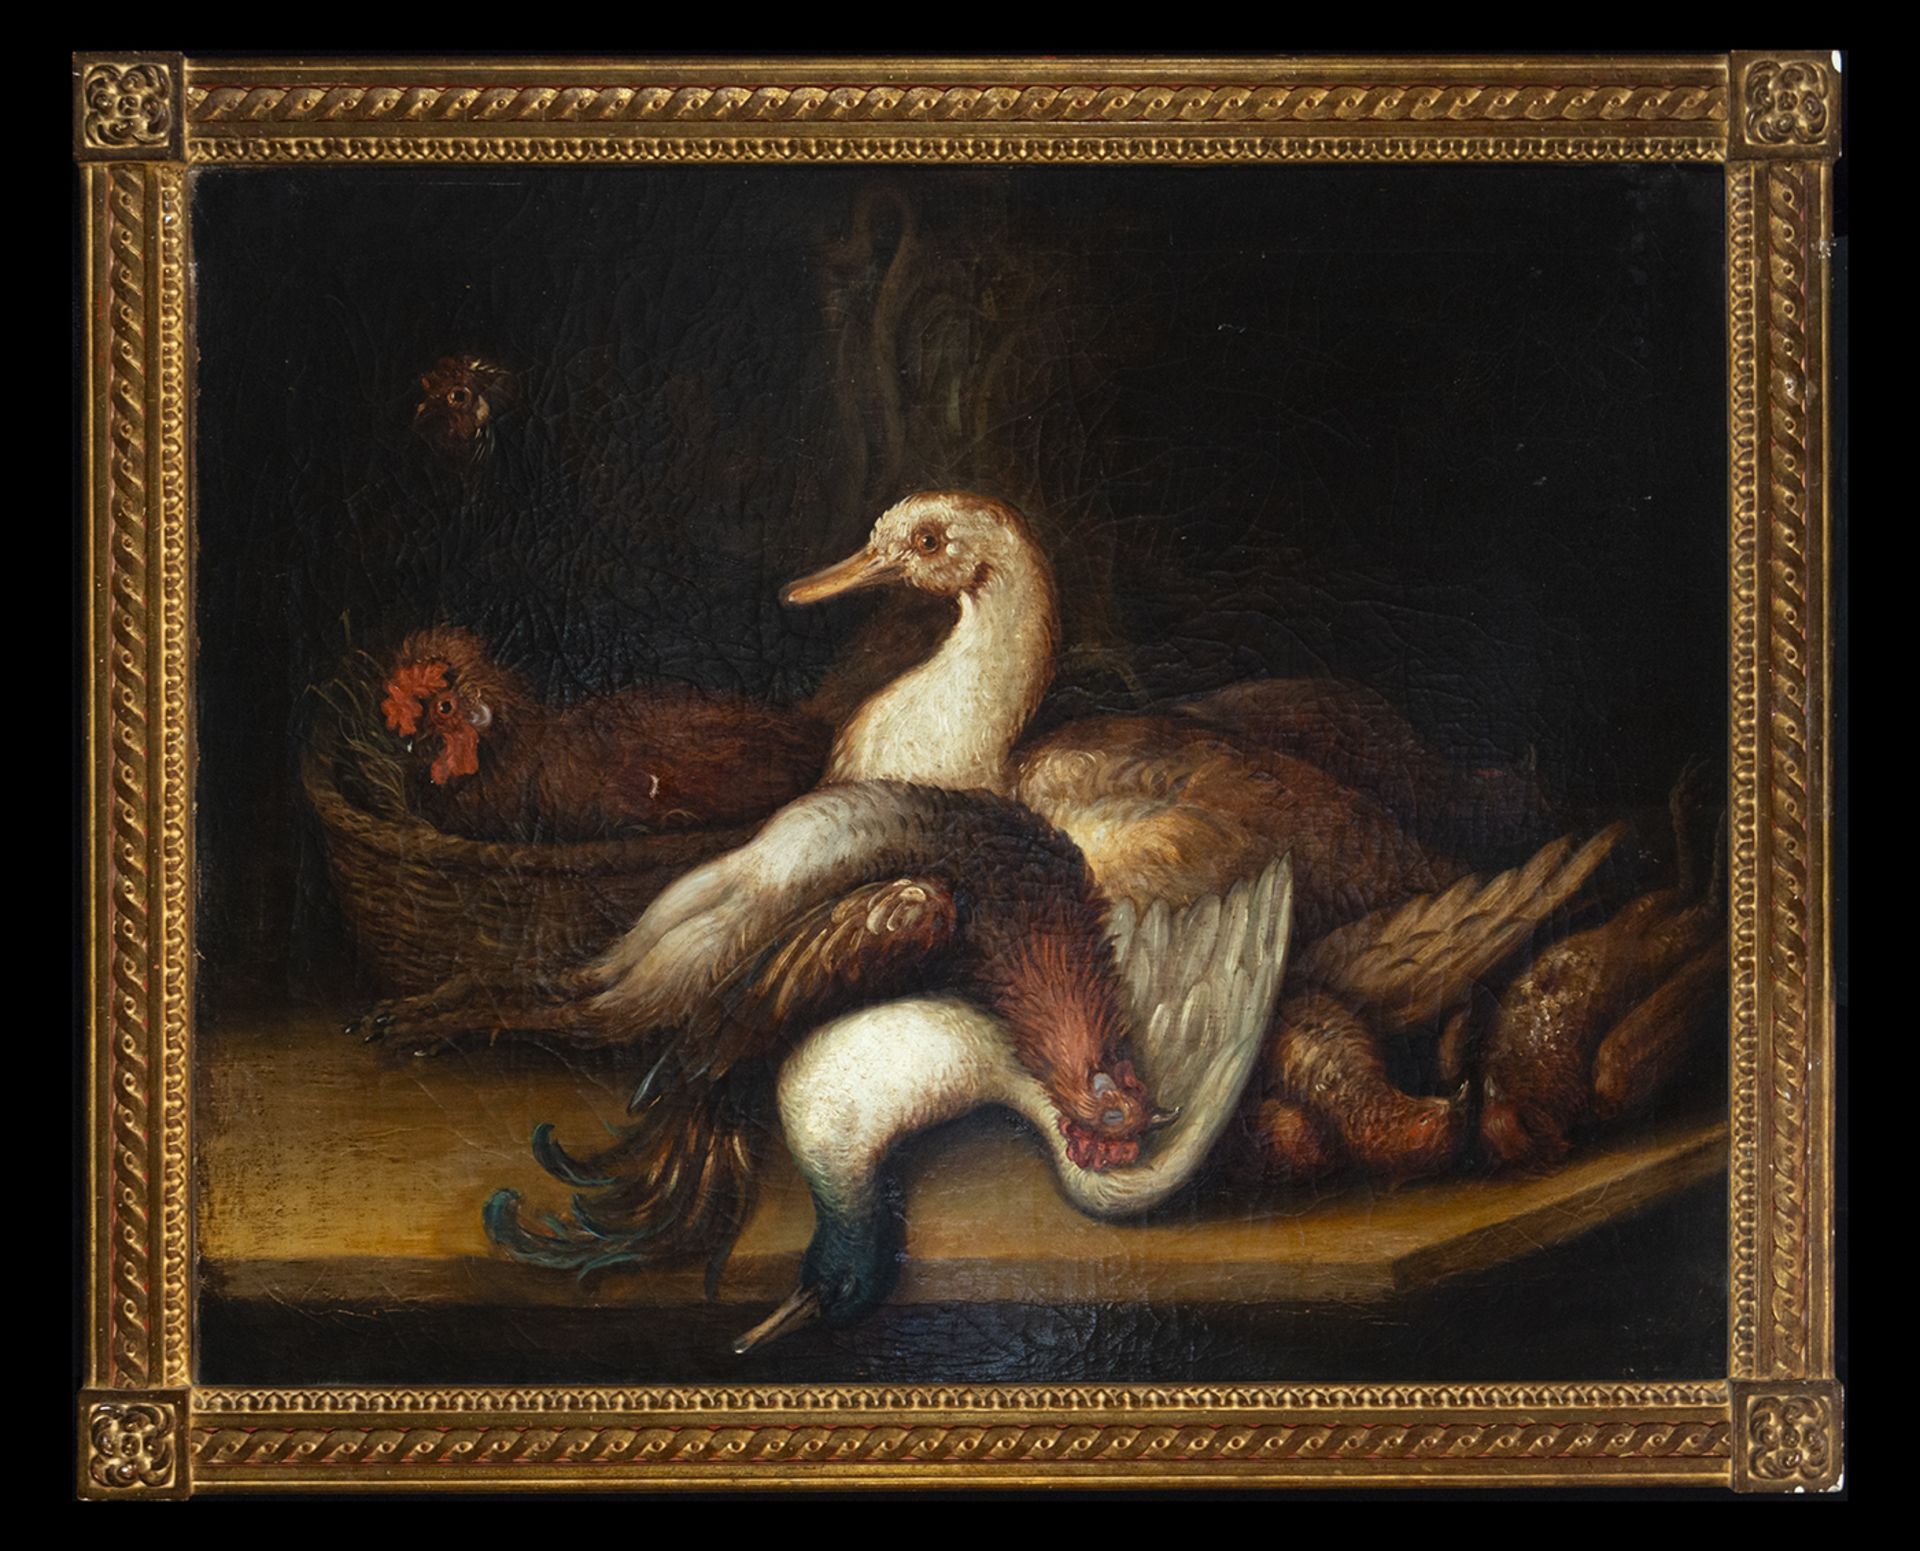 Still Life of Birds from the 18th century - early 19th century, Belgian or Dutch school